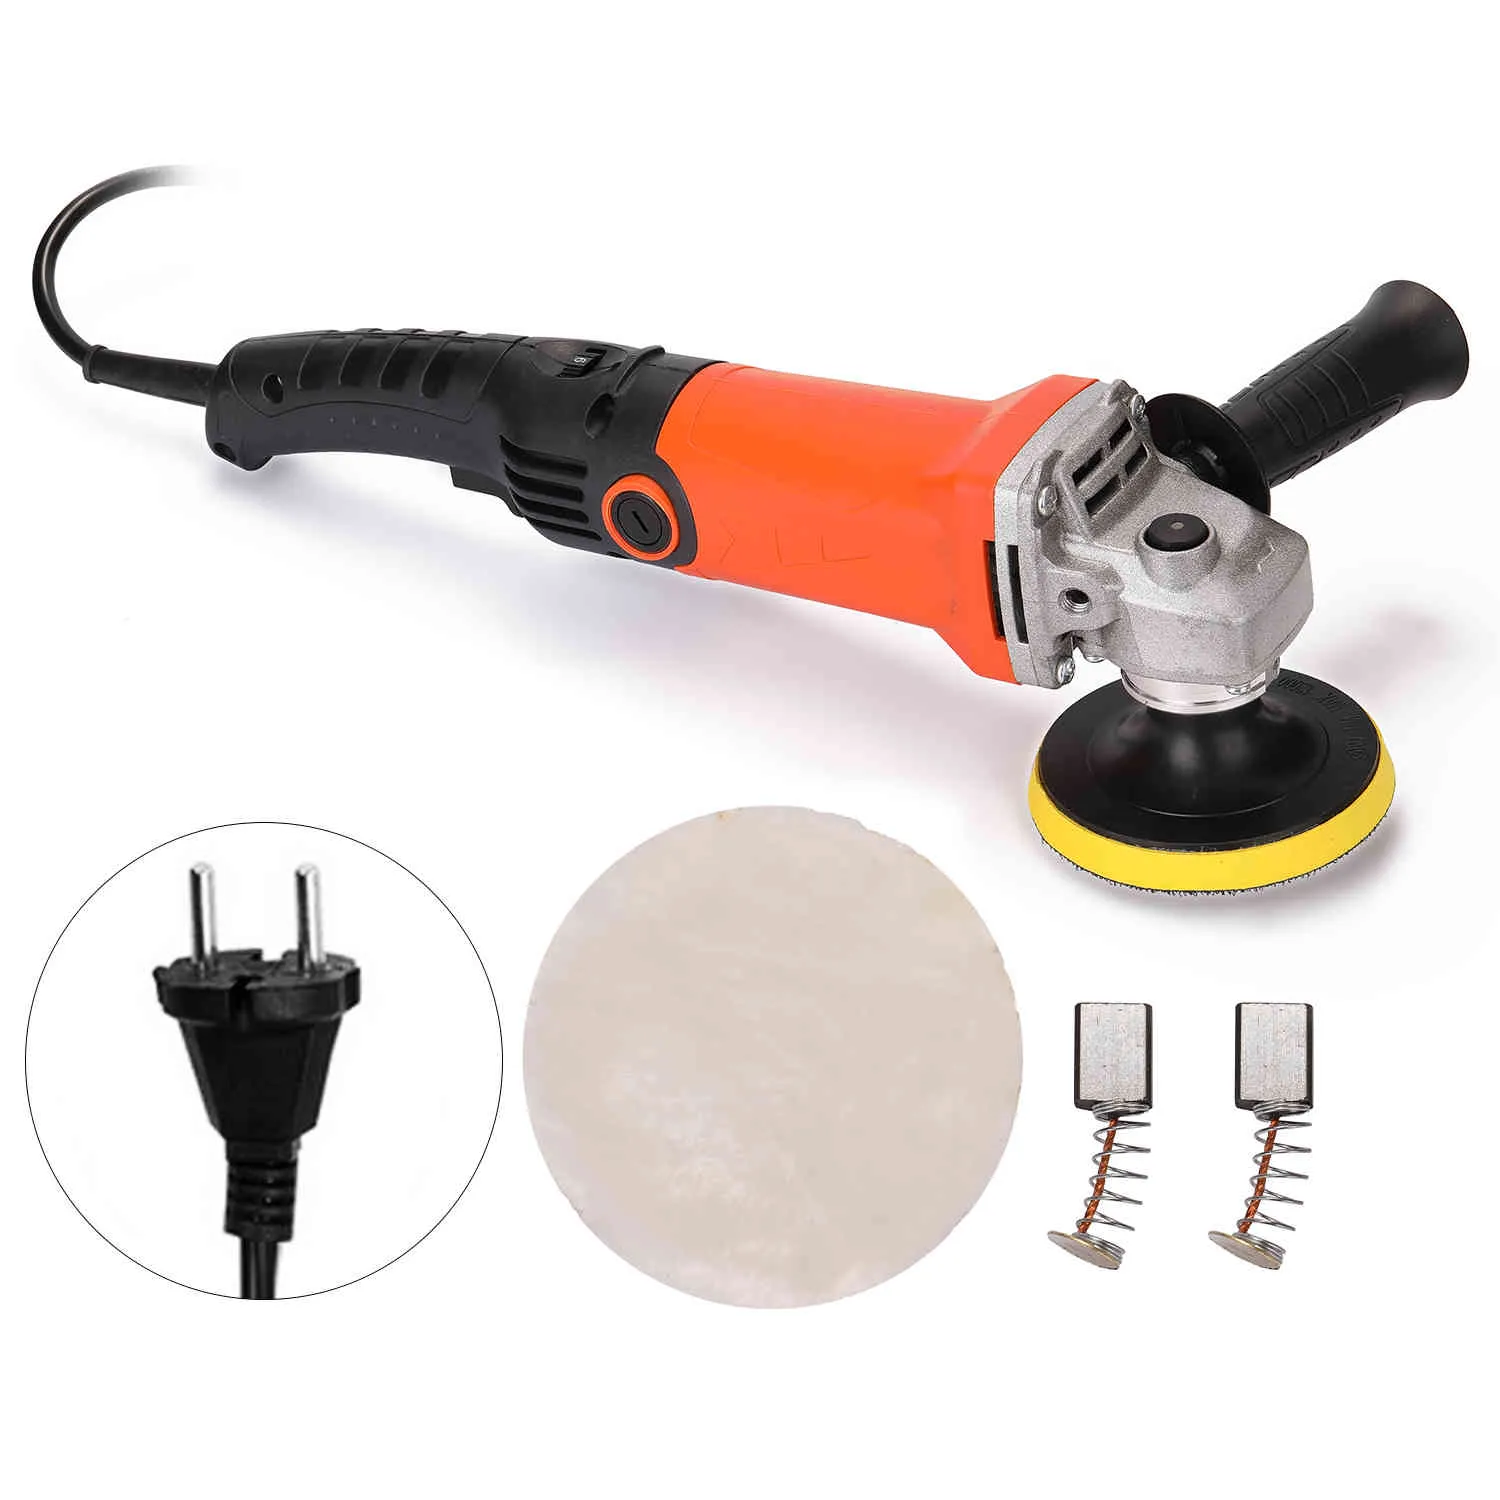 1200W 220V Adjustable Speed Car Electric Polisher Waxing Machine Automobile Furniture Polishing Tool Suitable For Automotive